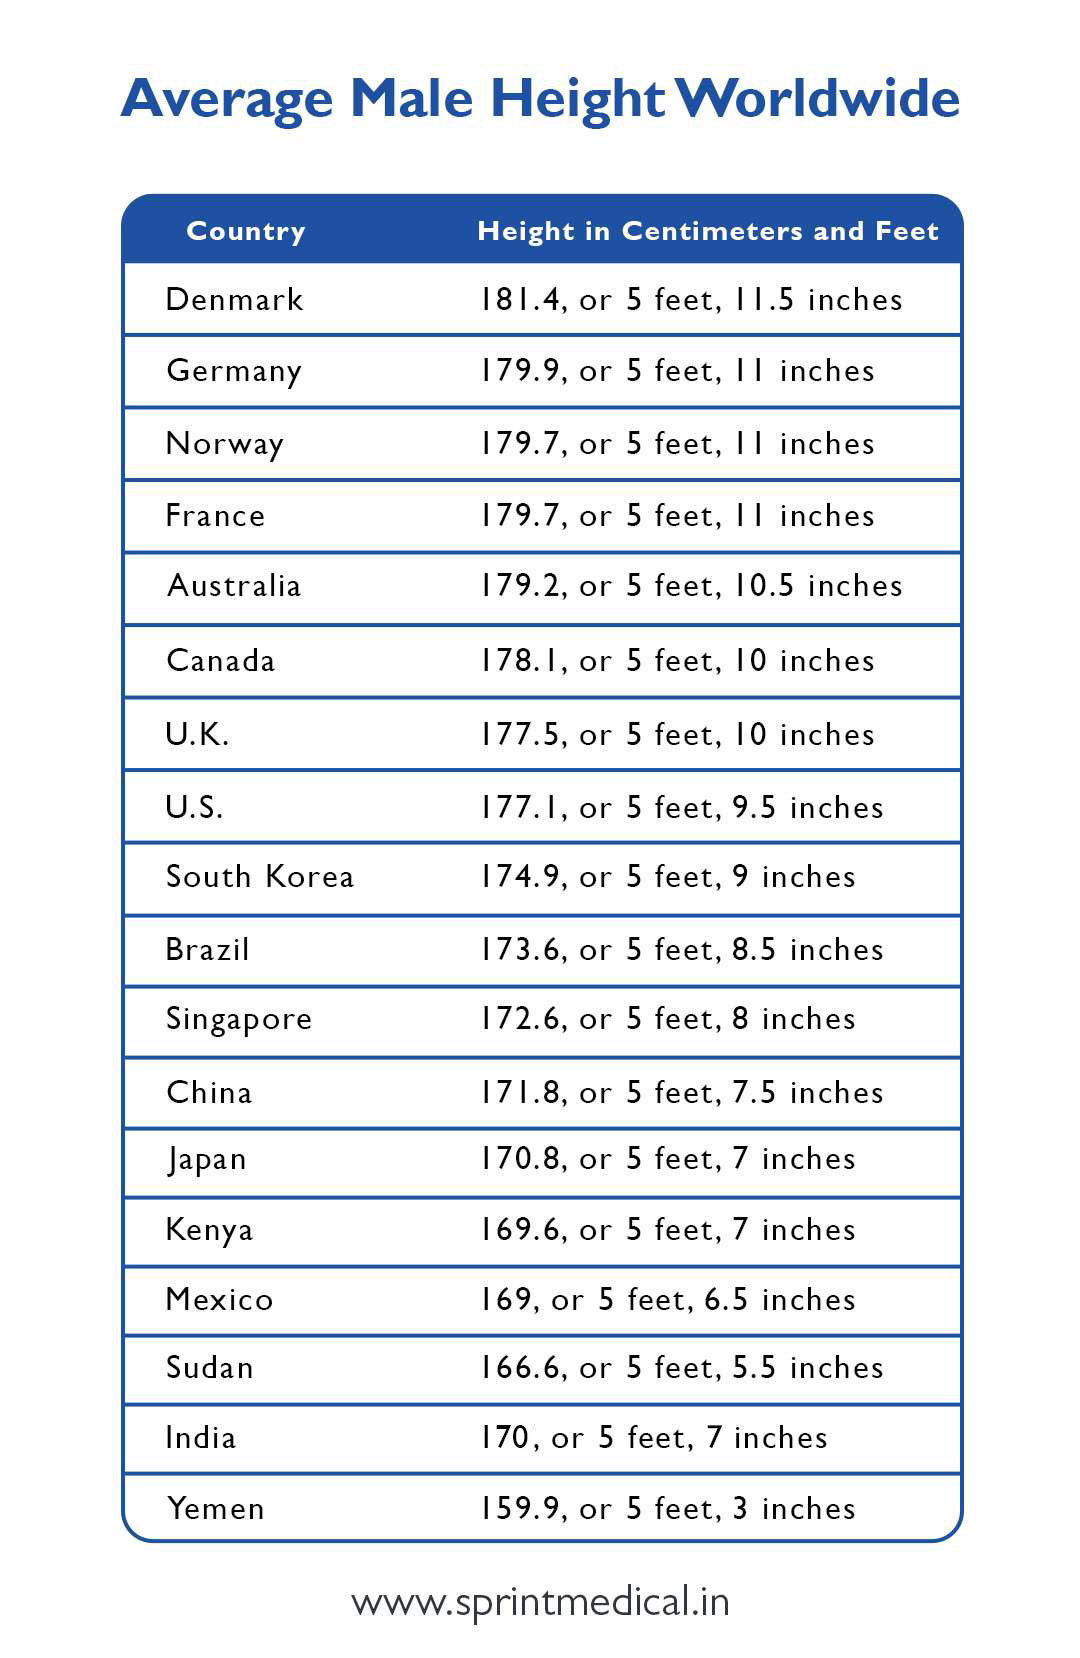 The Average Height of Men and Women Worldwide